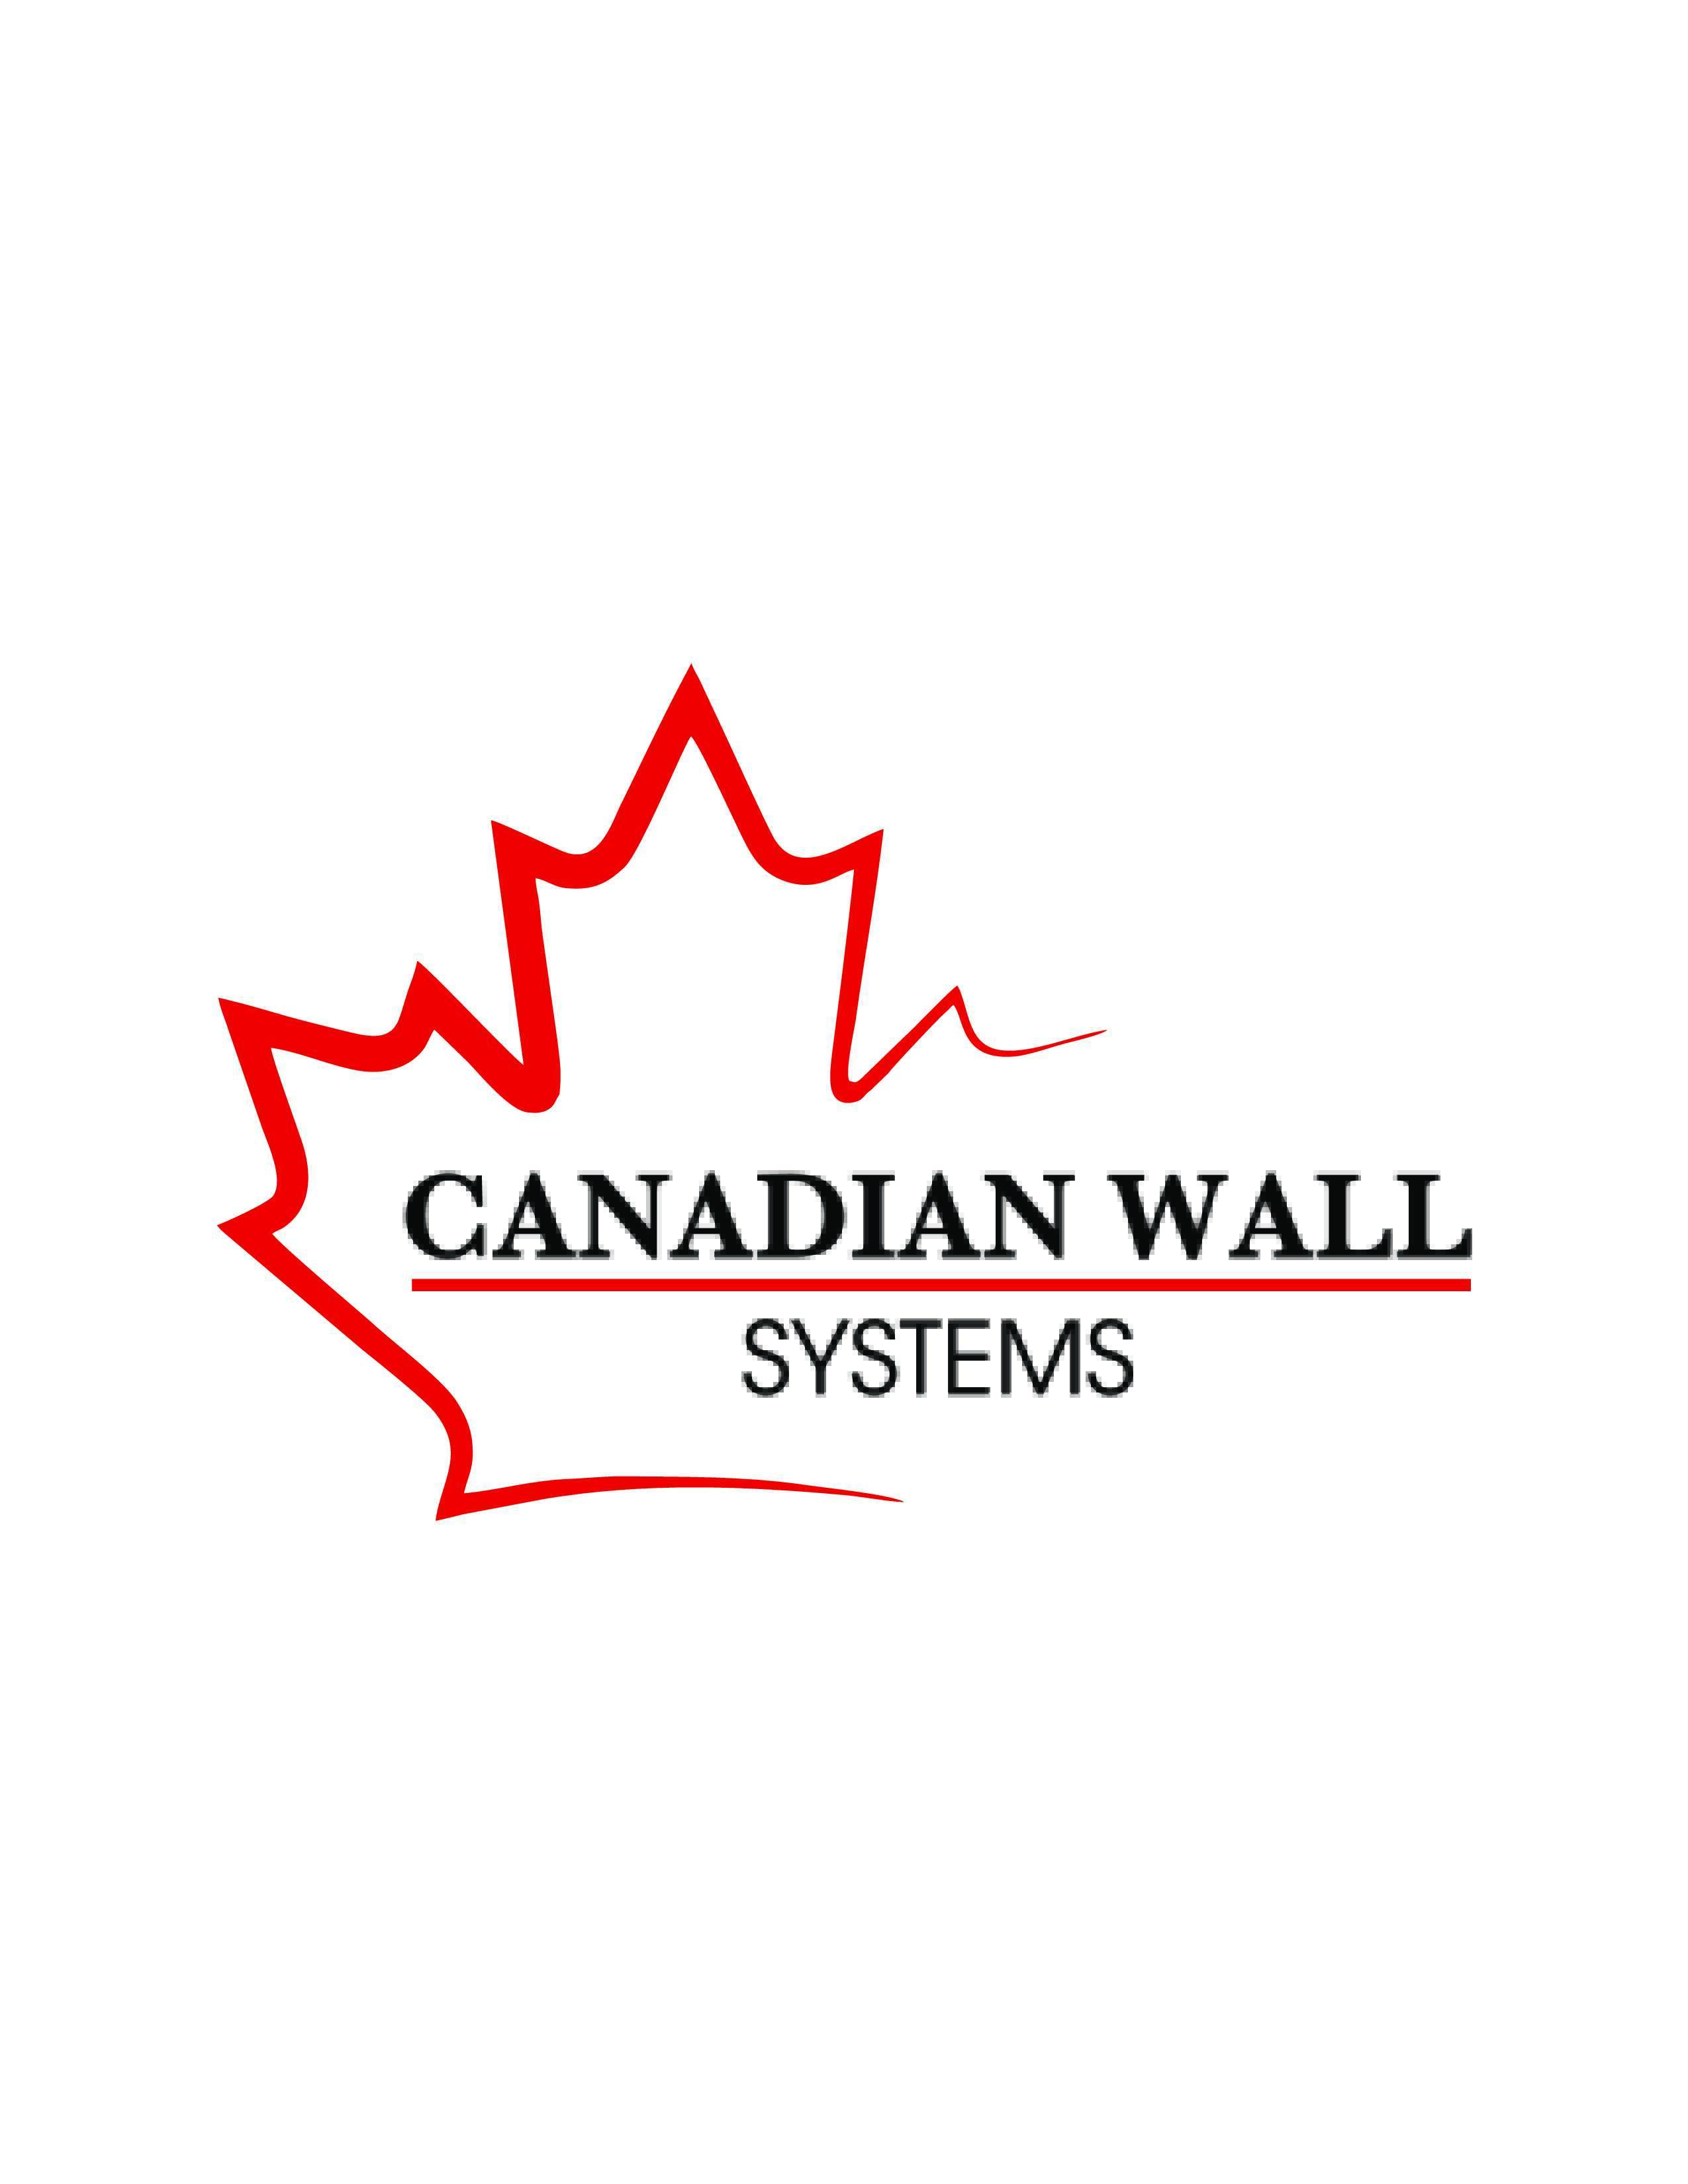 Canadian Wall Systems